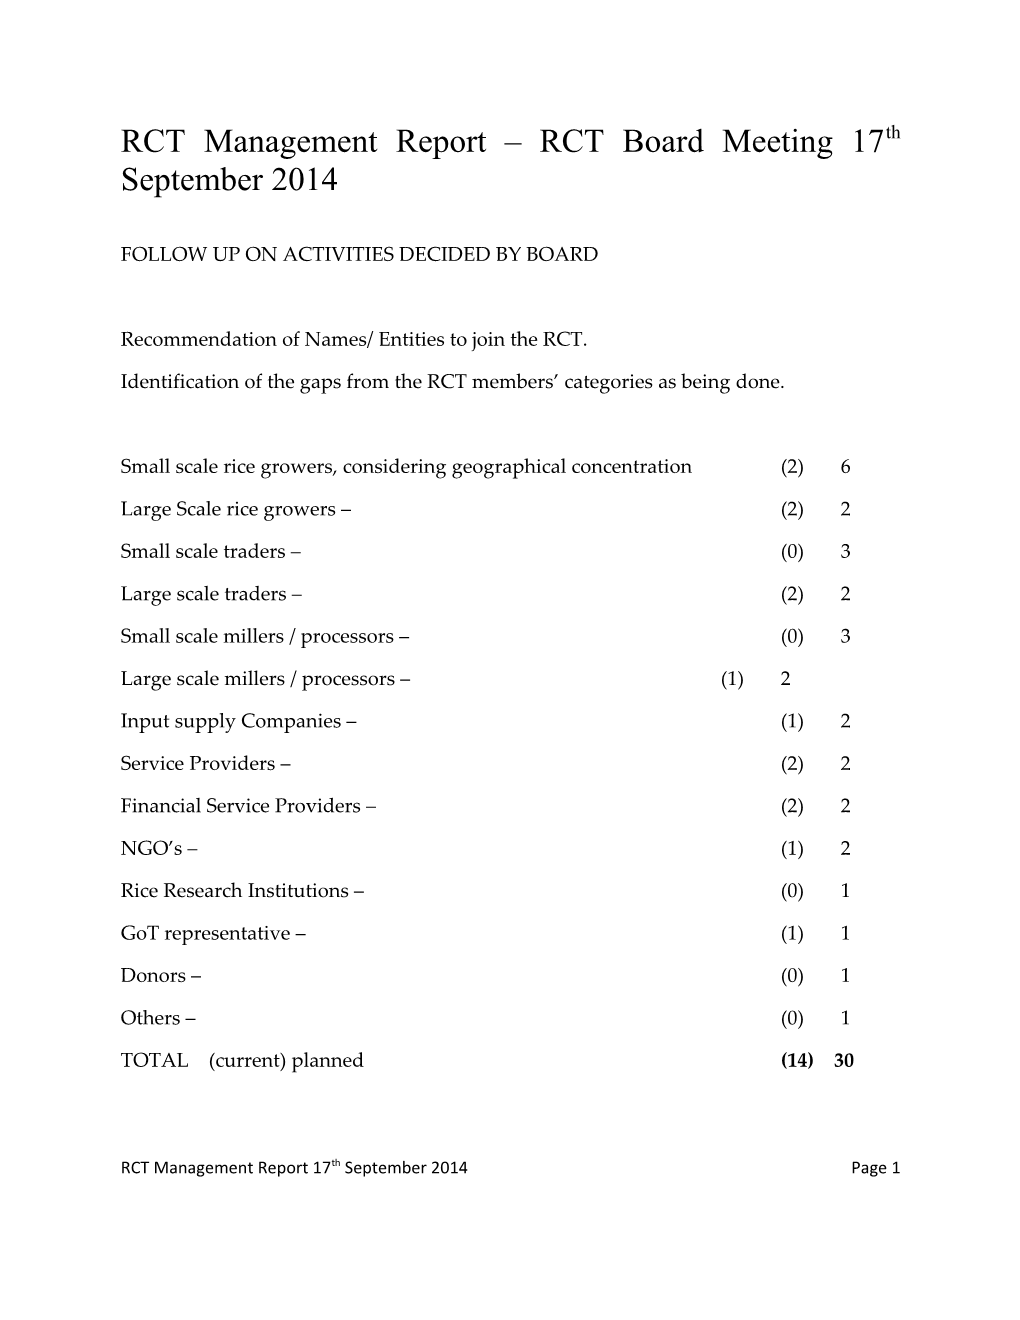 RCT Management Report RCT Board Meeting 17Th September 2014